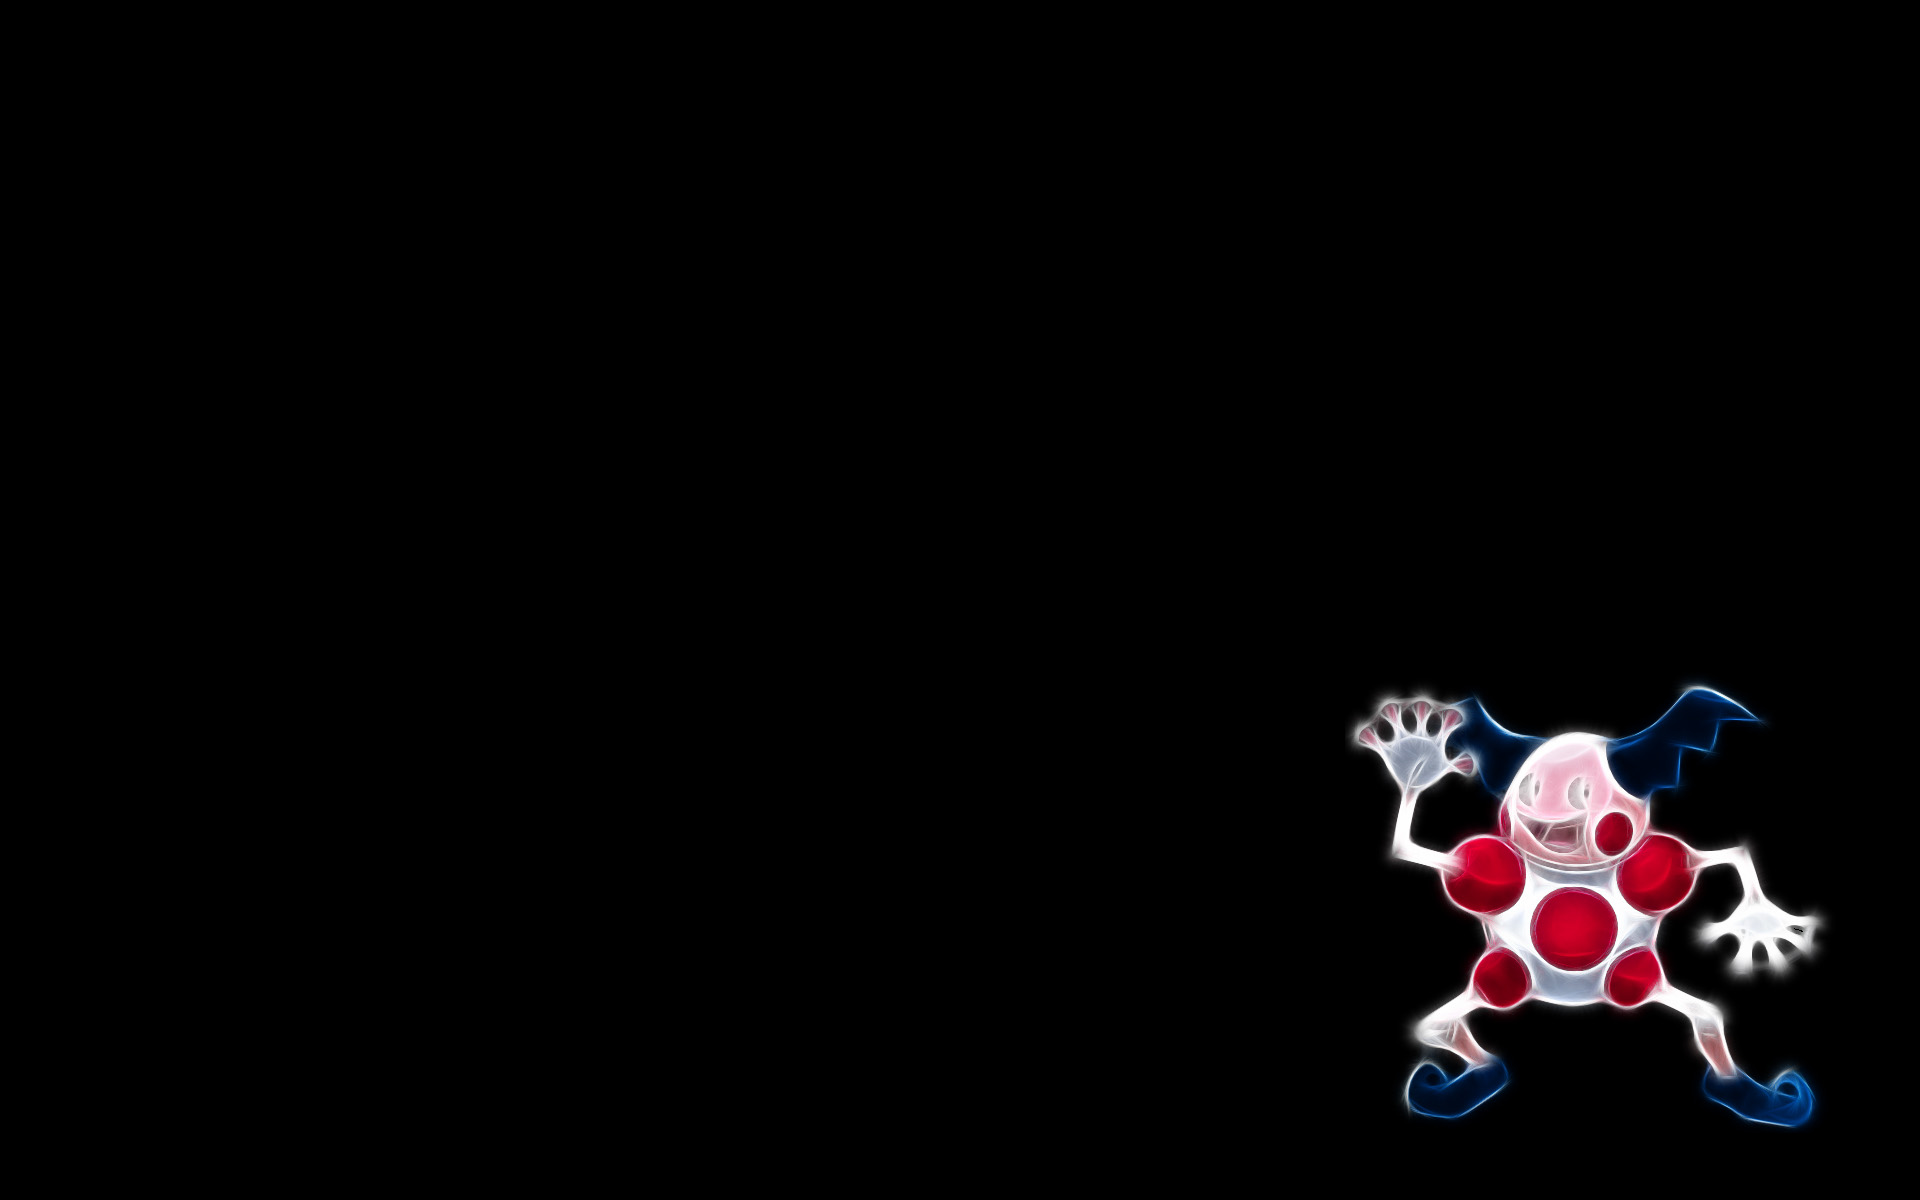 A mesmerizing Mr. Mime with psychic powers, ready to unfold its enchanting performance.